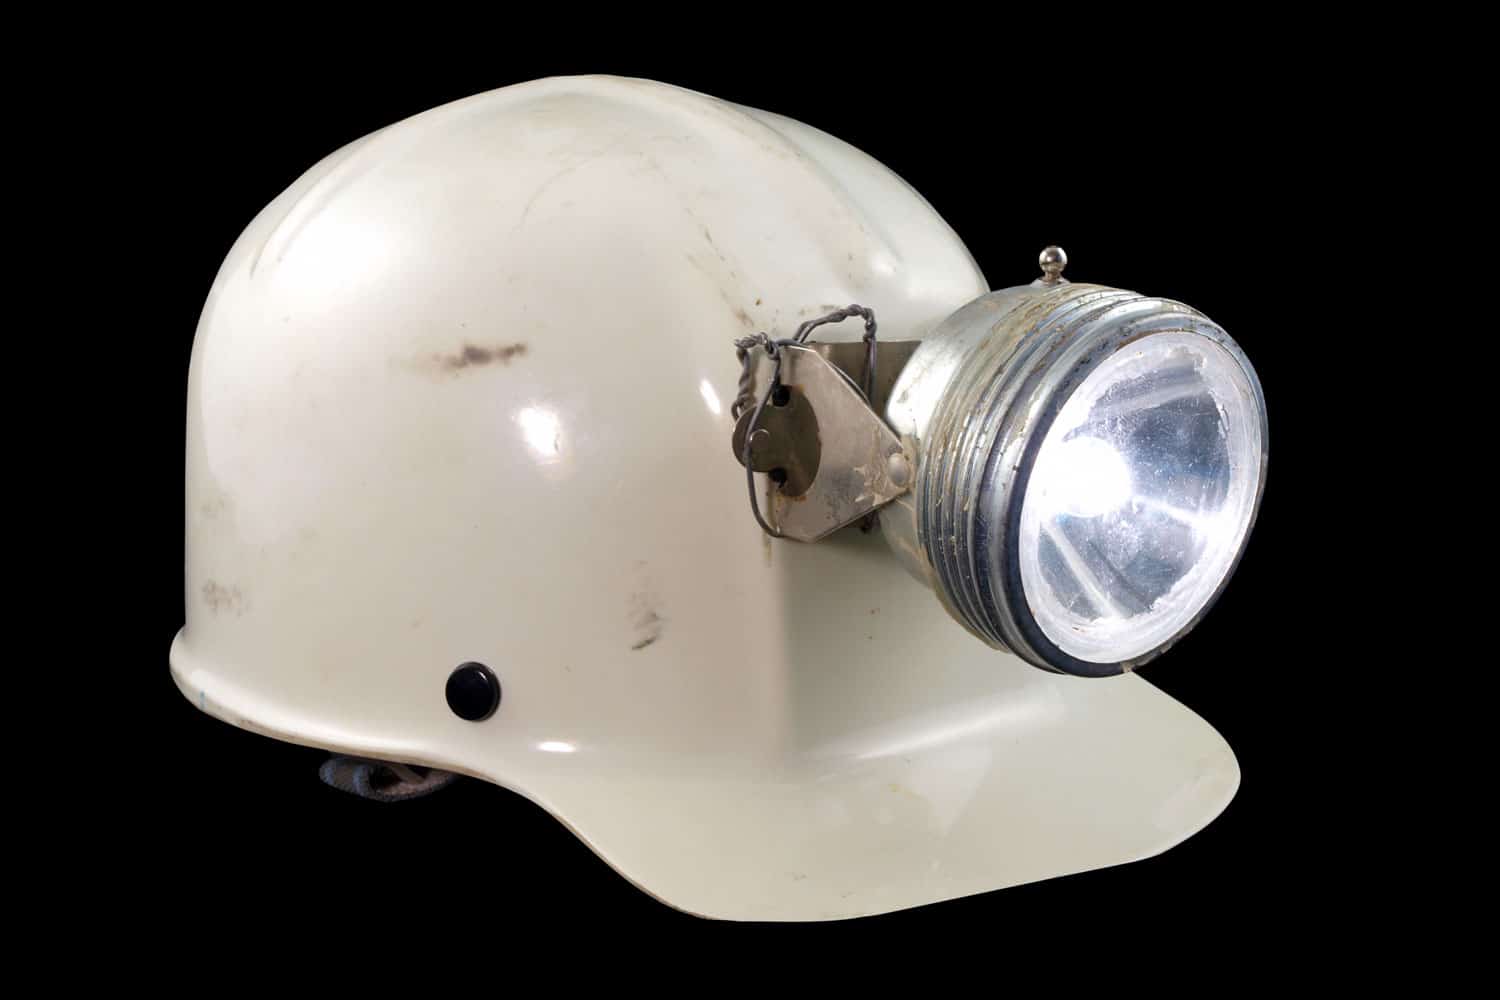 Vintage caving mining hard hat from the 1970's.